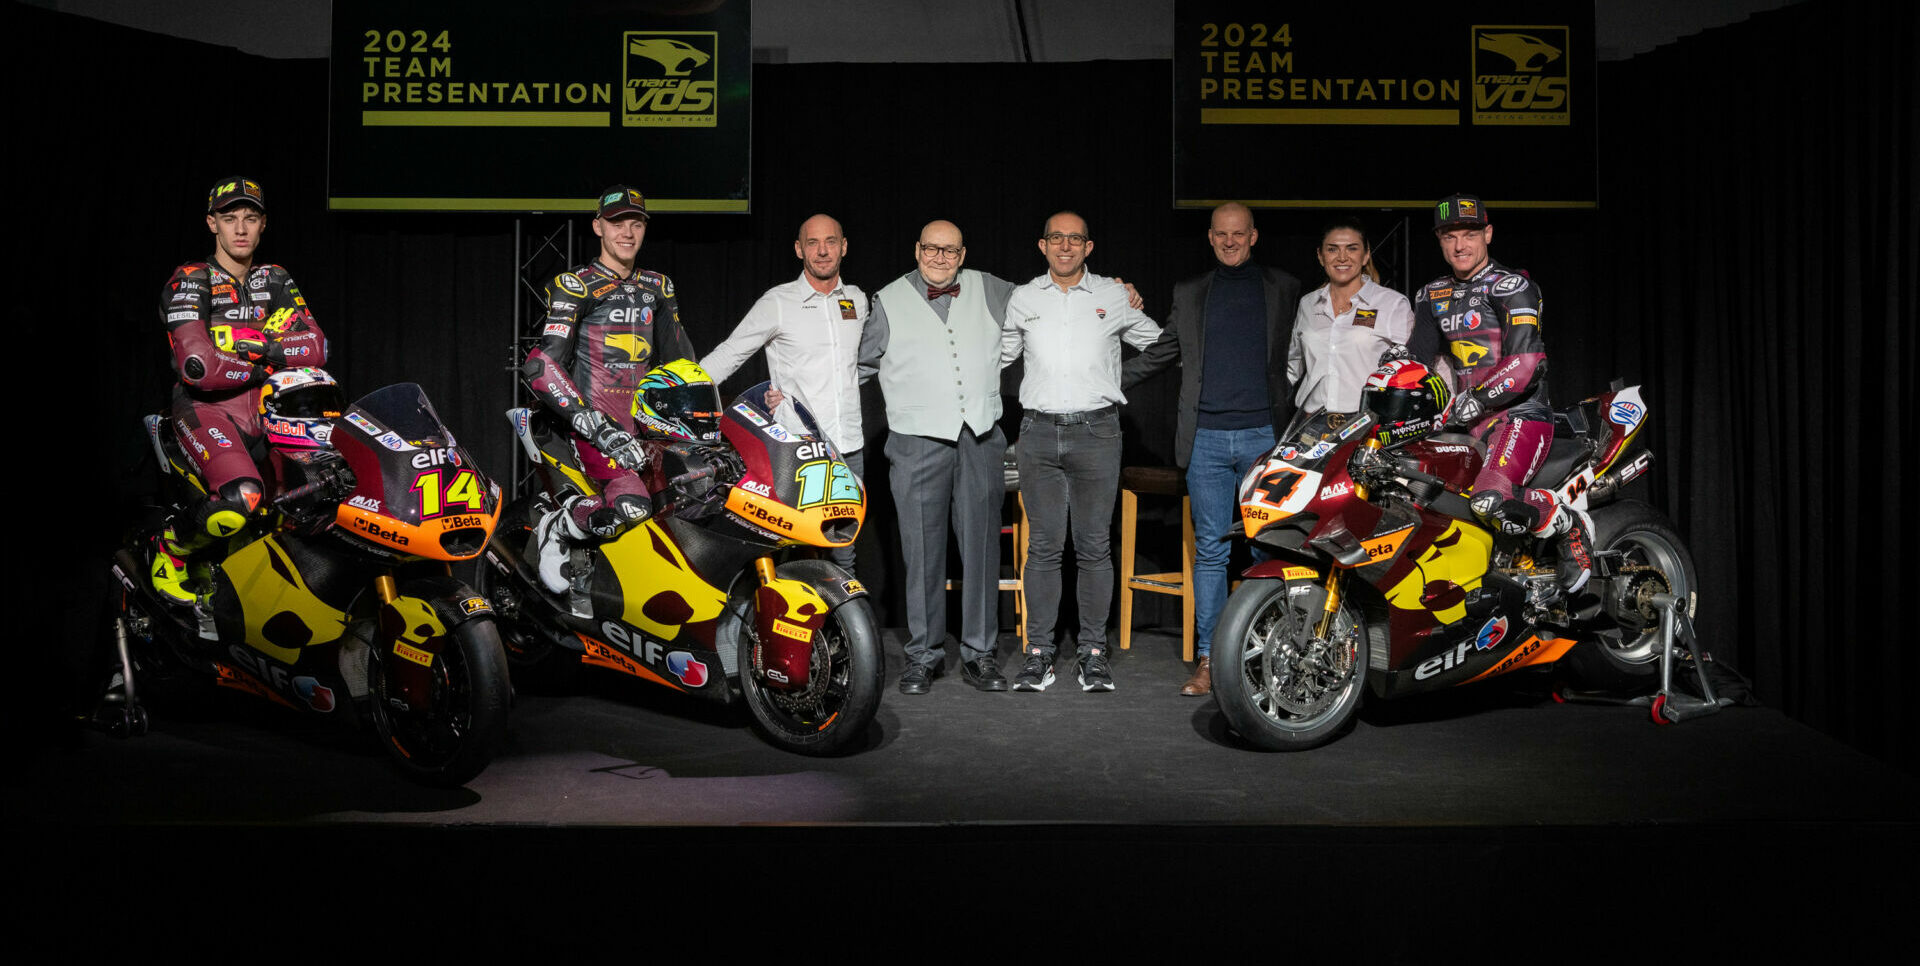 Elf Marc VDS Racing Team owner Marc van der Straten (fourth from left) with 2024 Moto2 riders Tony Arbolino (14) and Filip Salac (12) and 2024 World Superbike rider Sam Lowes (14). Photo courtesy Elf Marc VDS Racing Team.